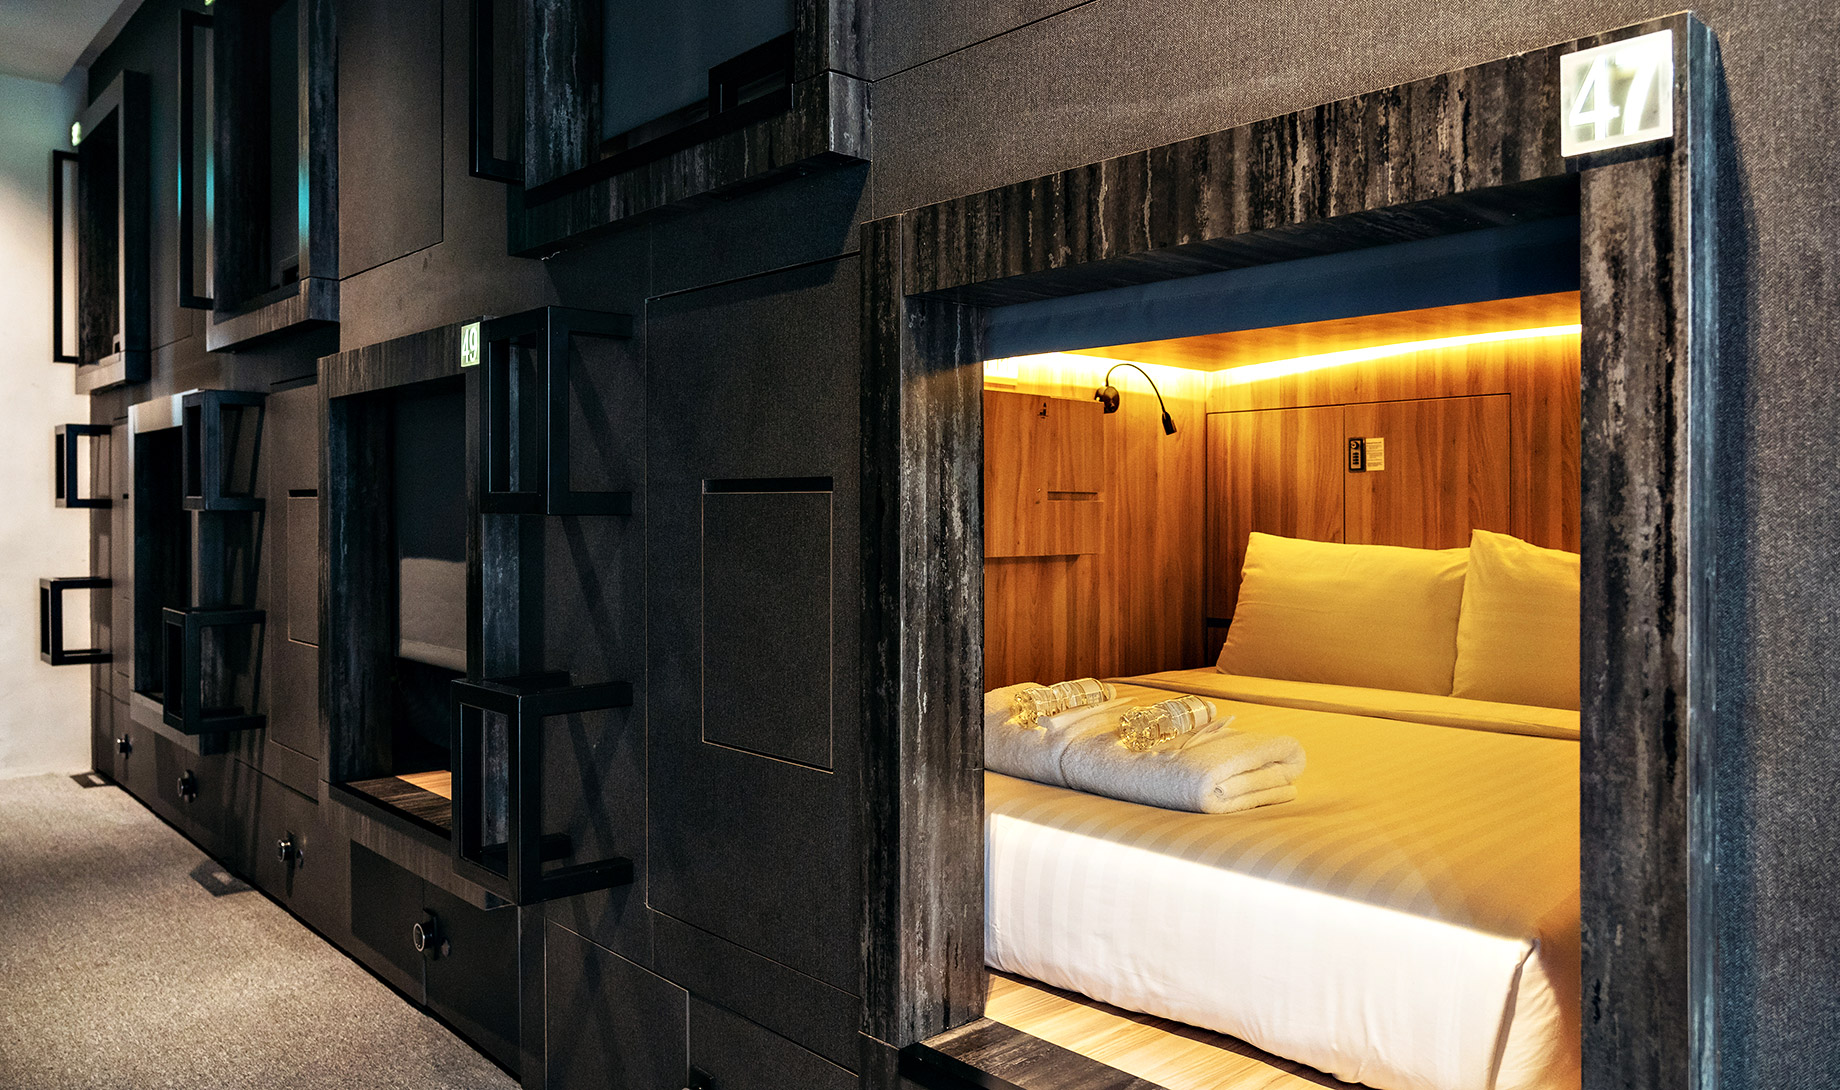 Interior View Of Capsule Hotel In Downtown, Chinatown, Singapore